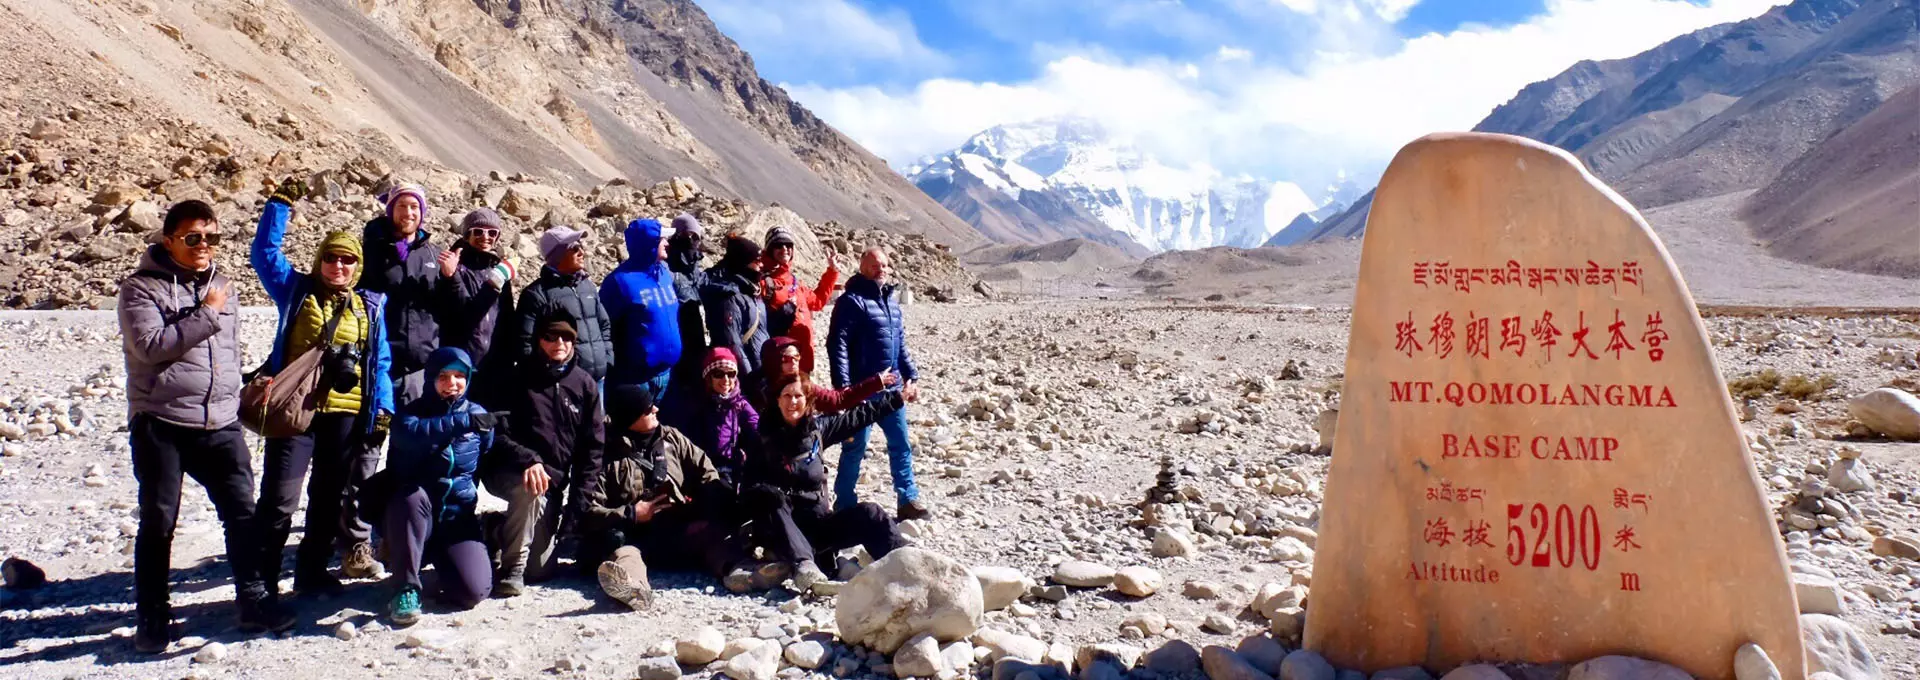 A group of tourists at Everest Base Camp